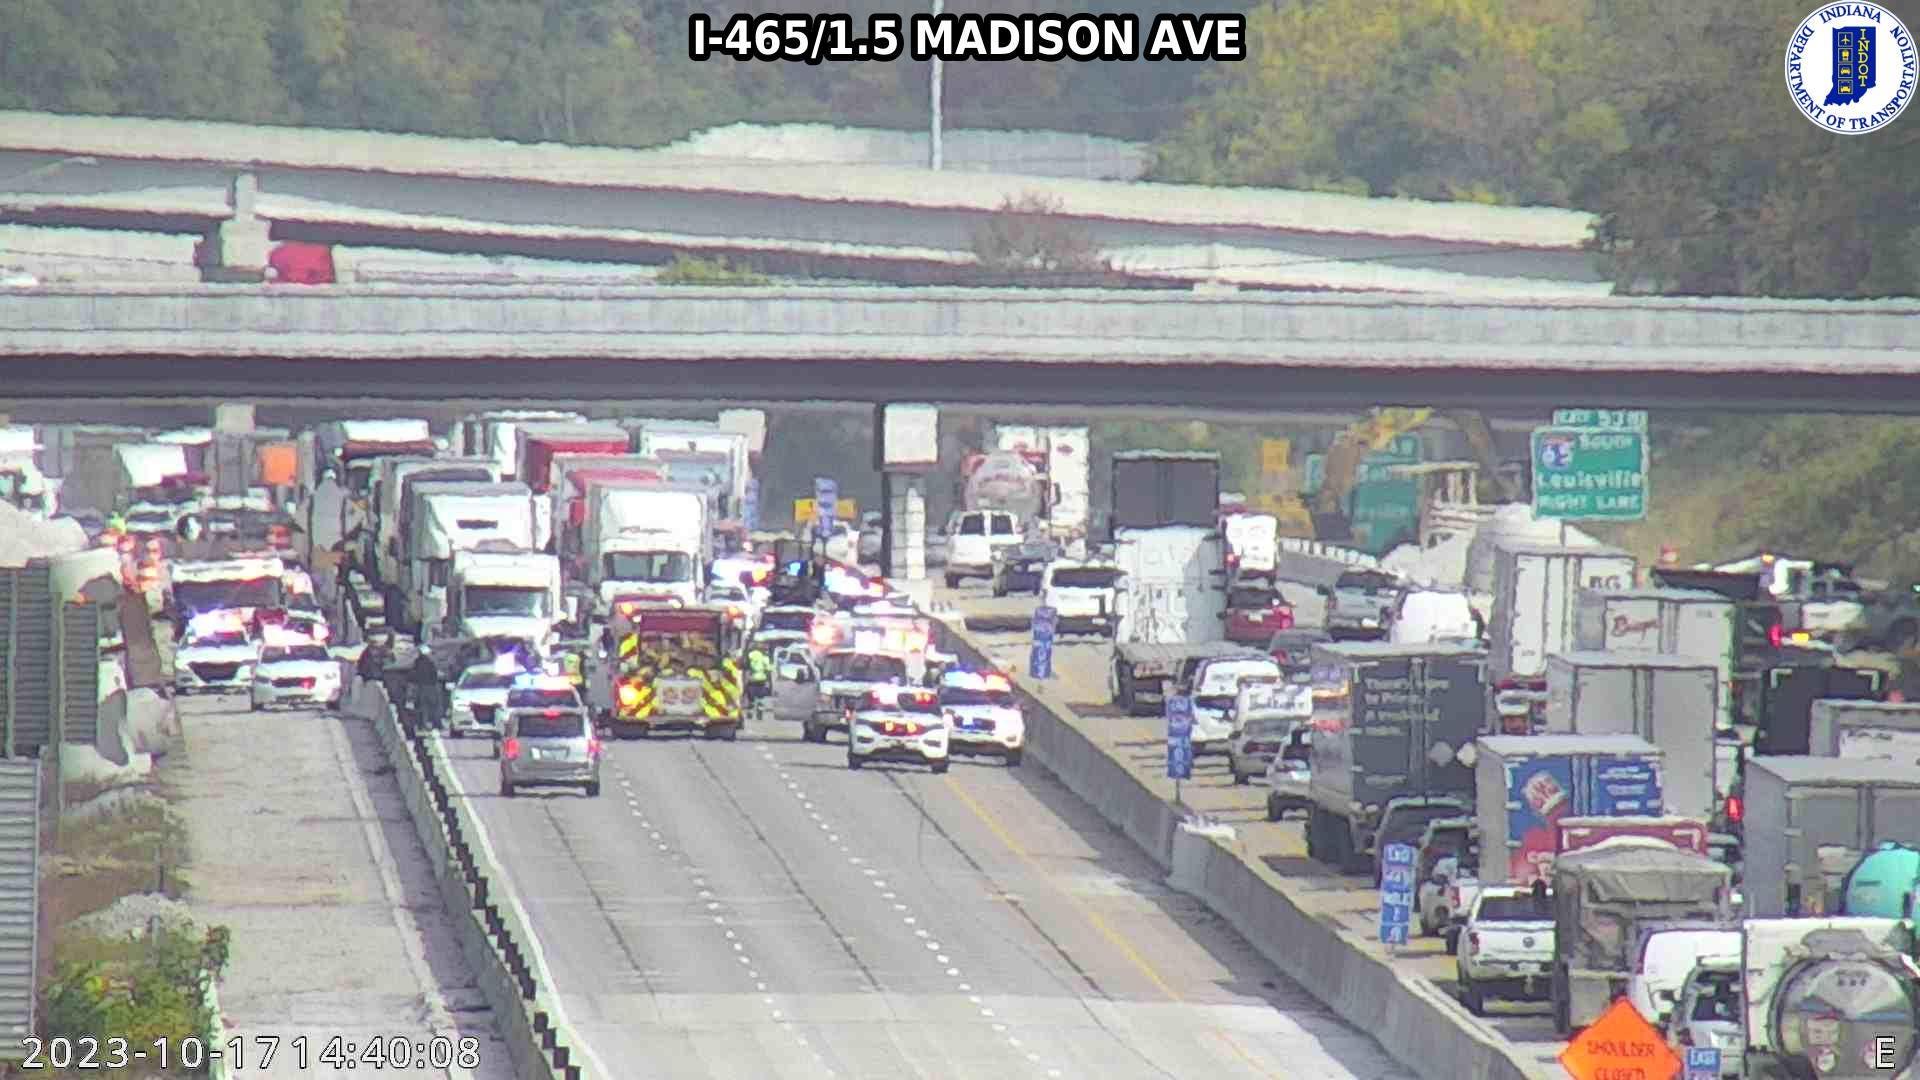 Traffic along I-465 near South Keystone Avenue and I-65 is as a halt after a police pursuit ended in a crash shortly before 2:30 p.m. Oct. 17, 2023.